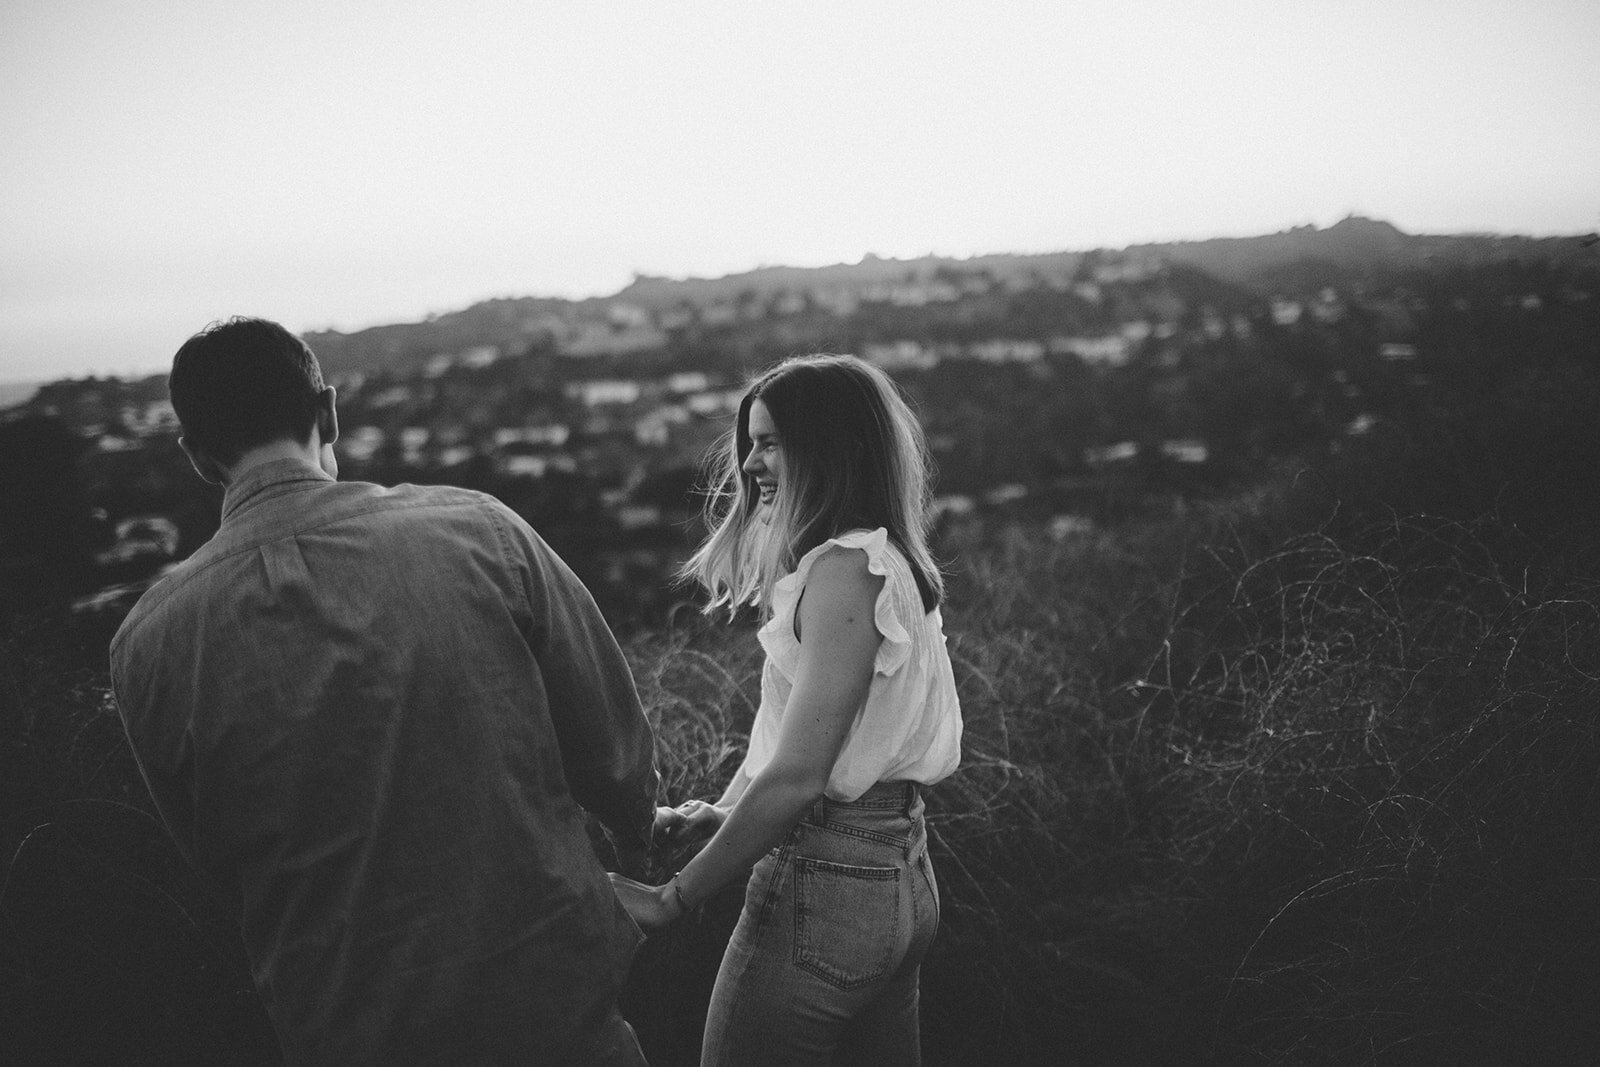 los angeles elopement, hollywood wedding locations, california elopement, los angeles elopement locations, how to elope in los angeles, adventure session, adventure elopement, adventure session outfit, cupcakes and cashmere, los angeles elopement photographer, sustainable fashion, lifestyle blogger, los angeles proposal ideas, engagement photo ideas, los angeles engagement photos, runyon canyon, los angeles engagement photo locations, sunset elopement photos, engagement photo poses